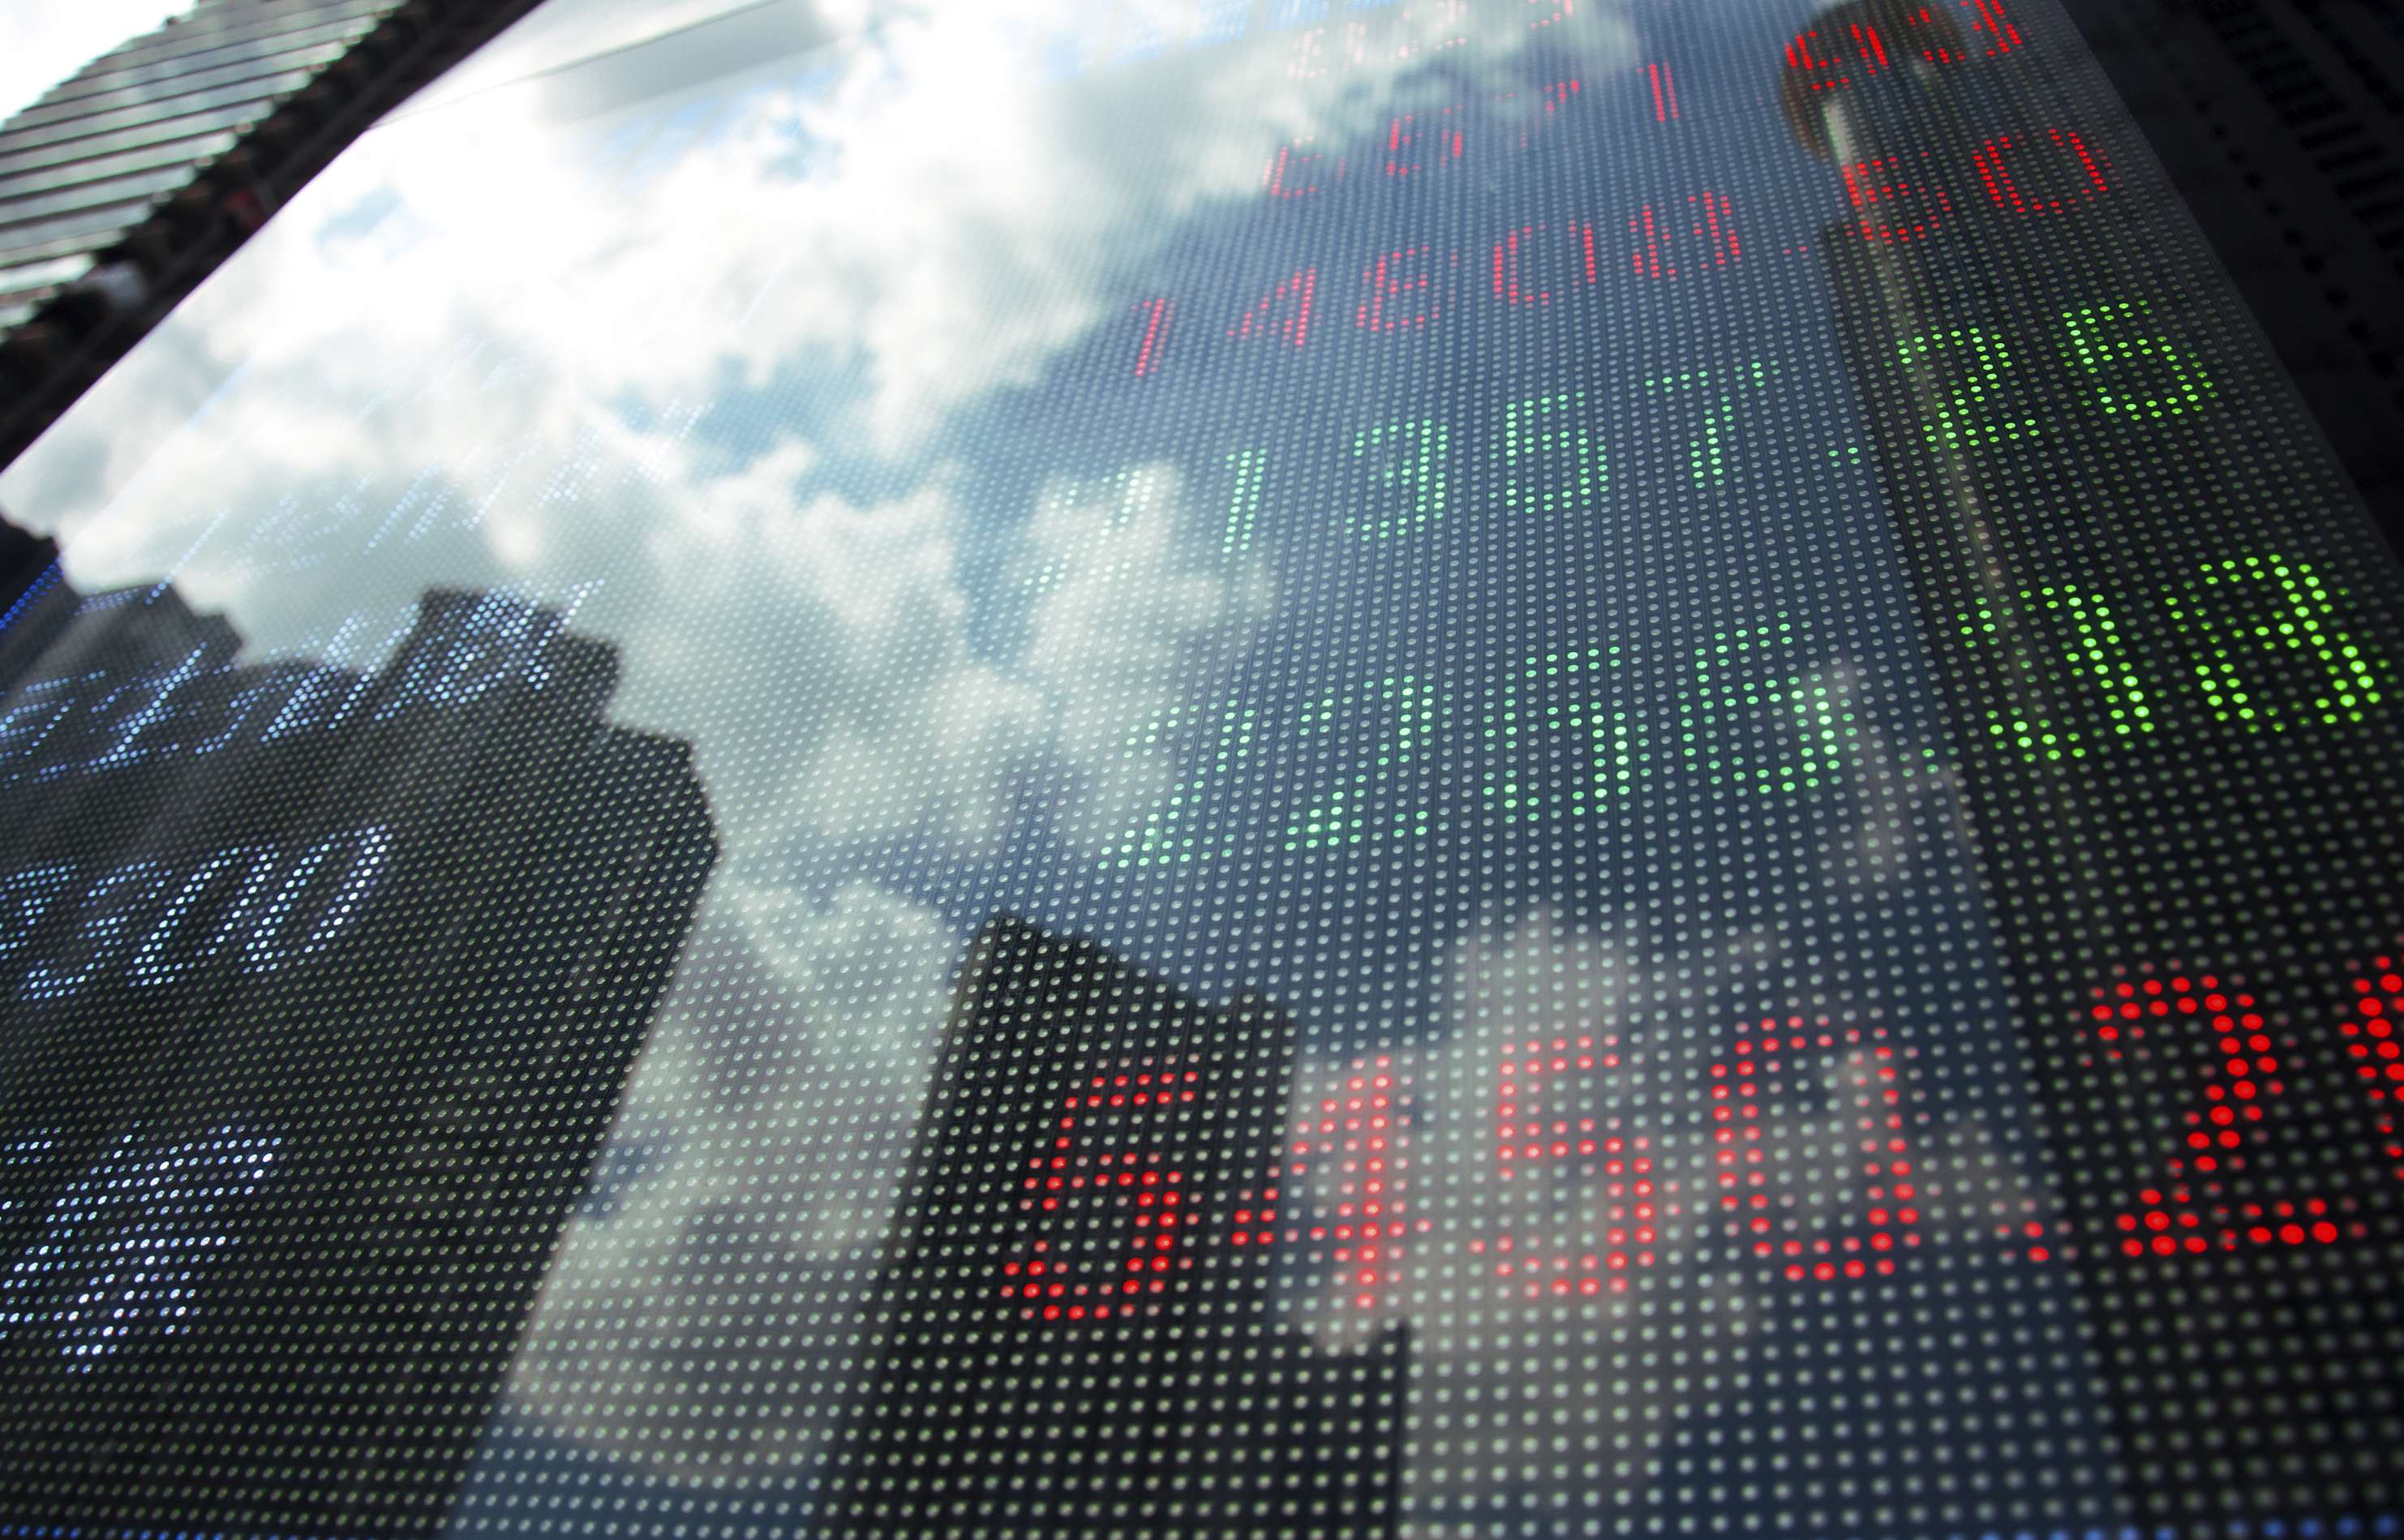 Regulatory changes implemented during the punishing sell-off in China stocks last year has taken a toll on investor confidence, according to Li Jiange, China’s former top securities regulator. Photo: SCMP Pictures